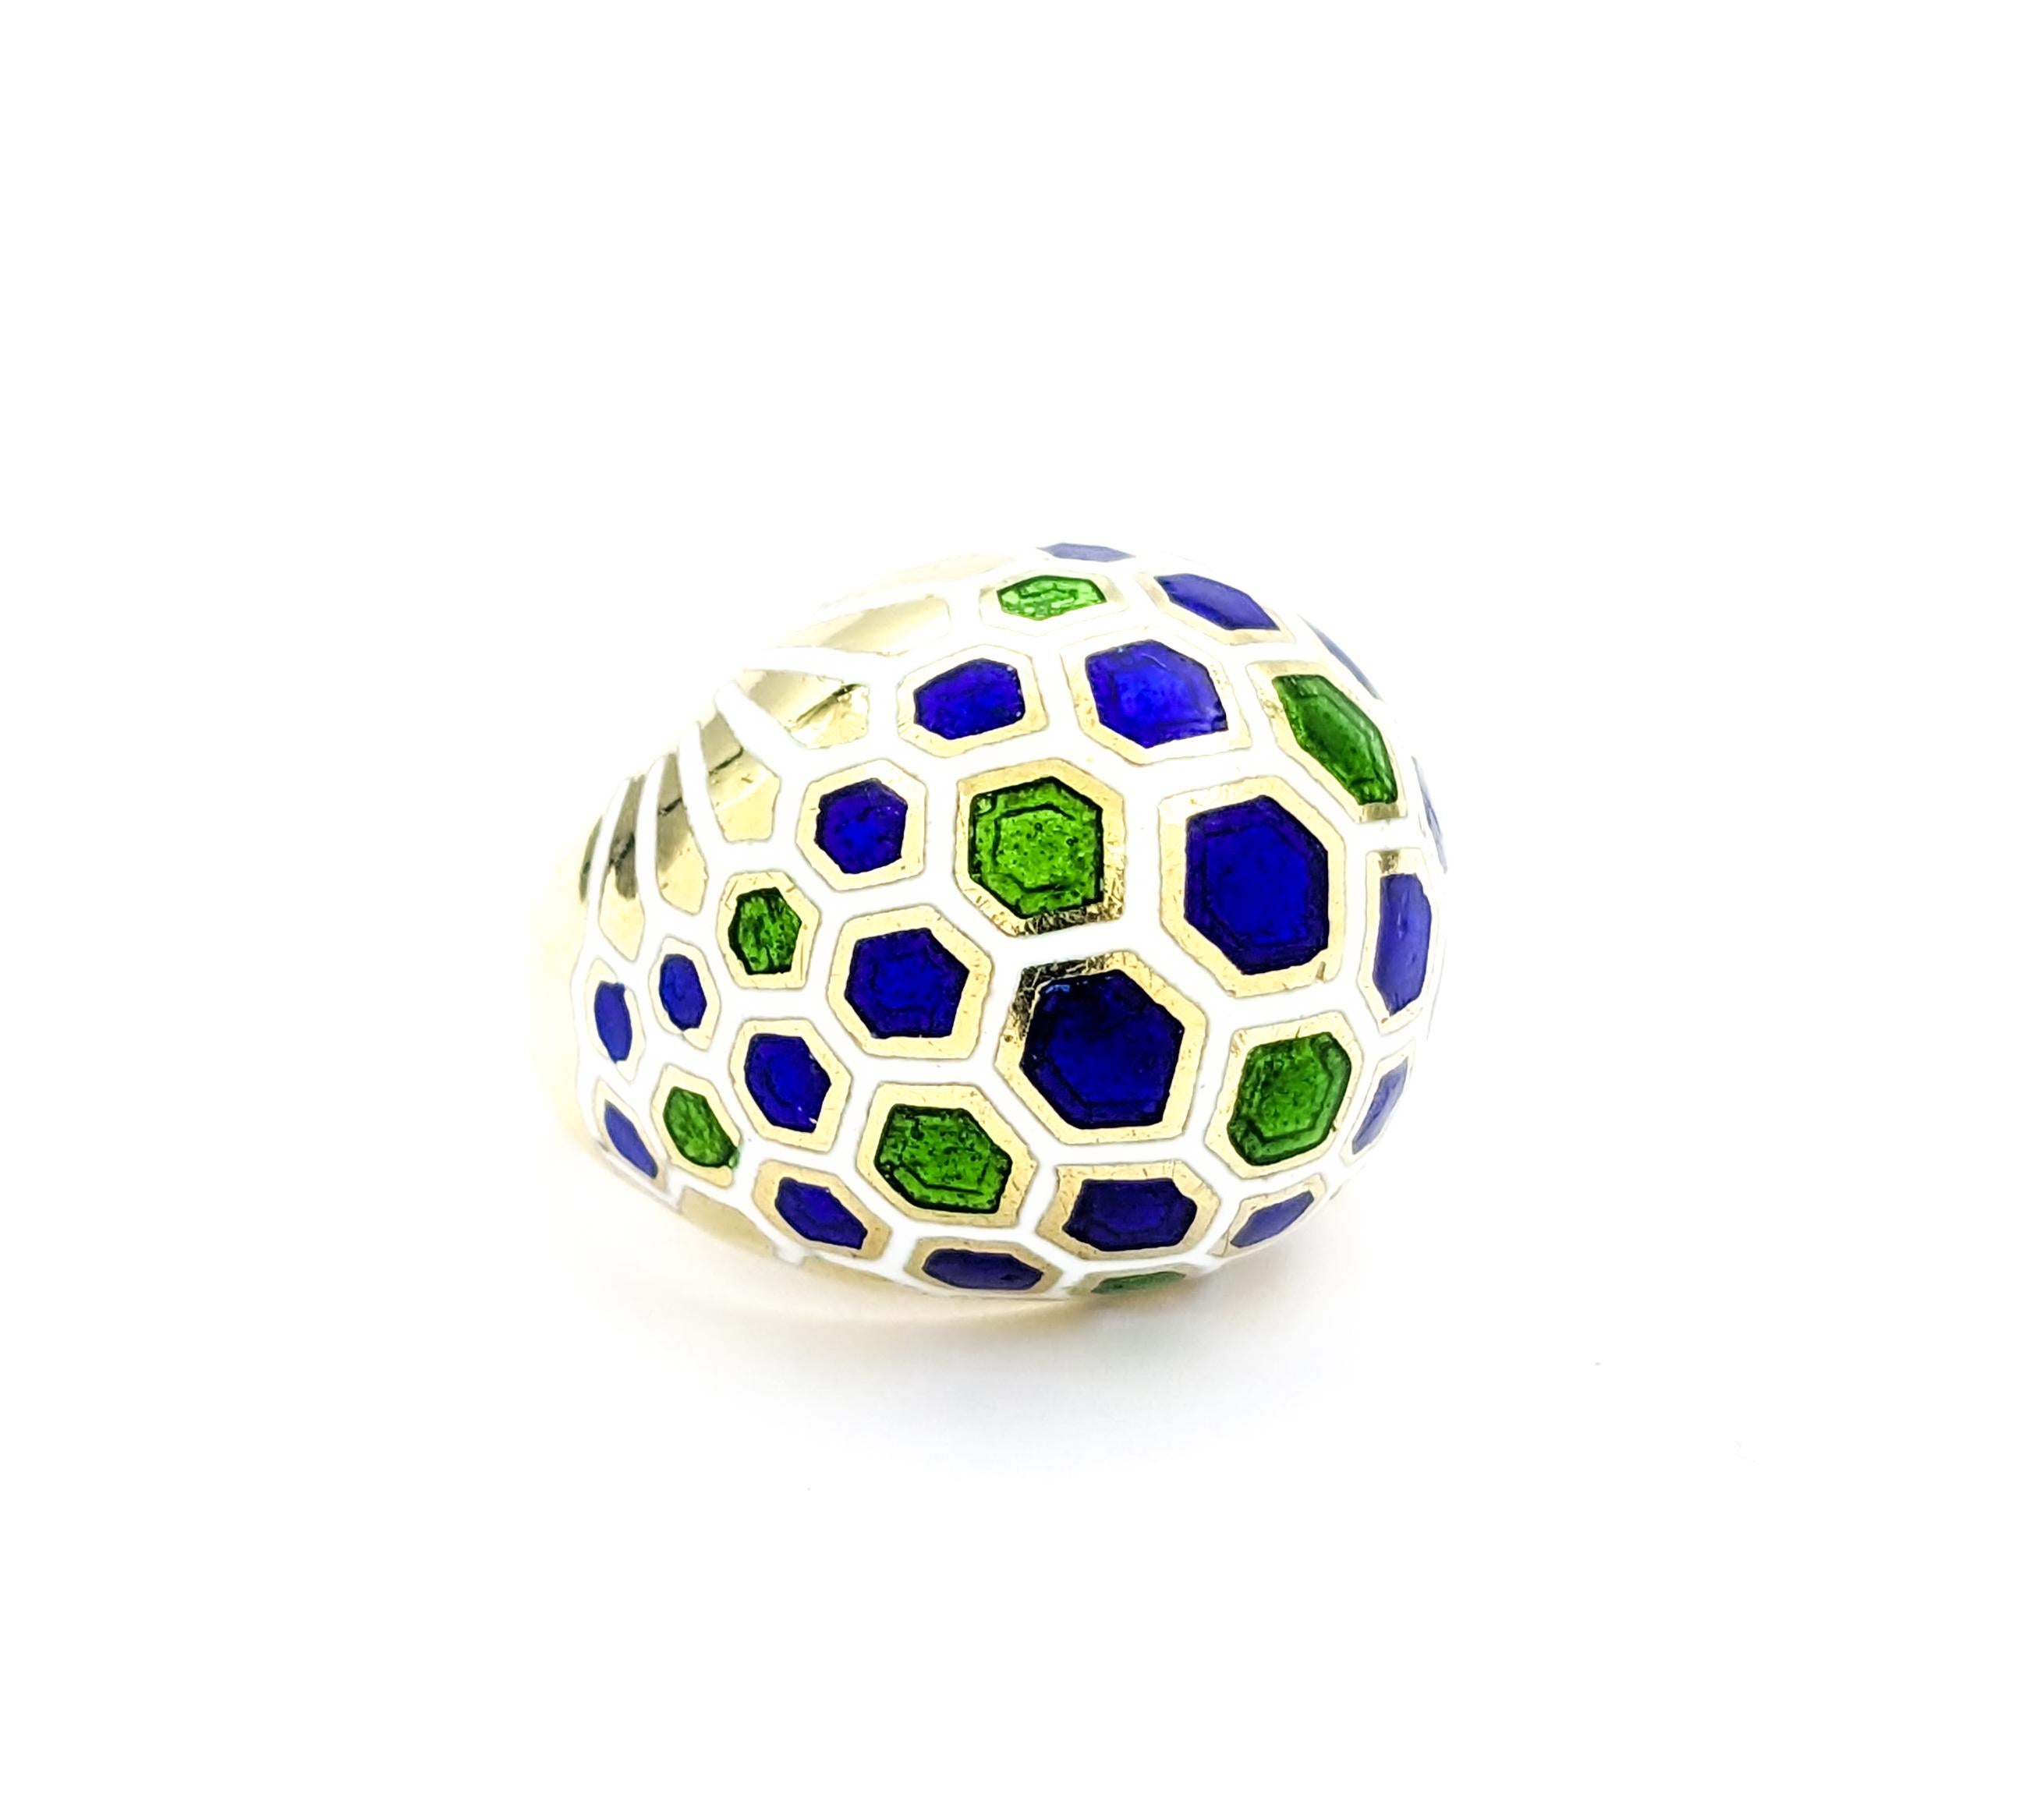 Unique Design With Enameled Hexagons Ring In Yellow Gold In Excellent Condition For Sale In Bloomington, MN